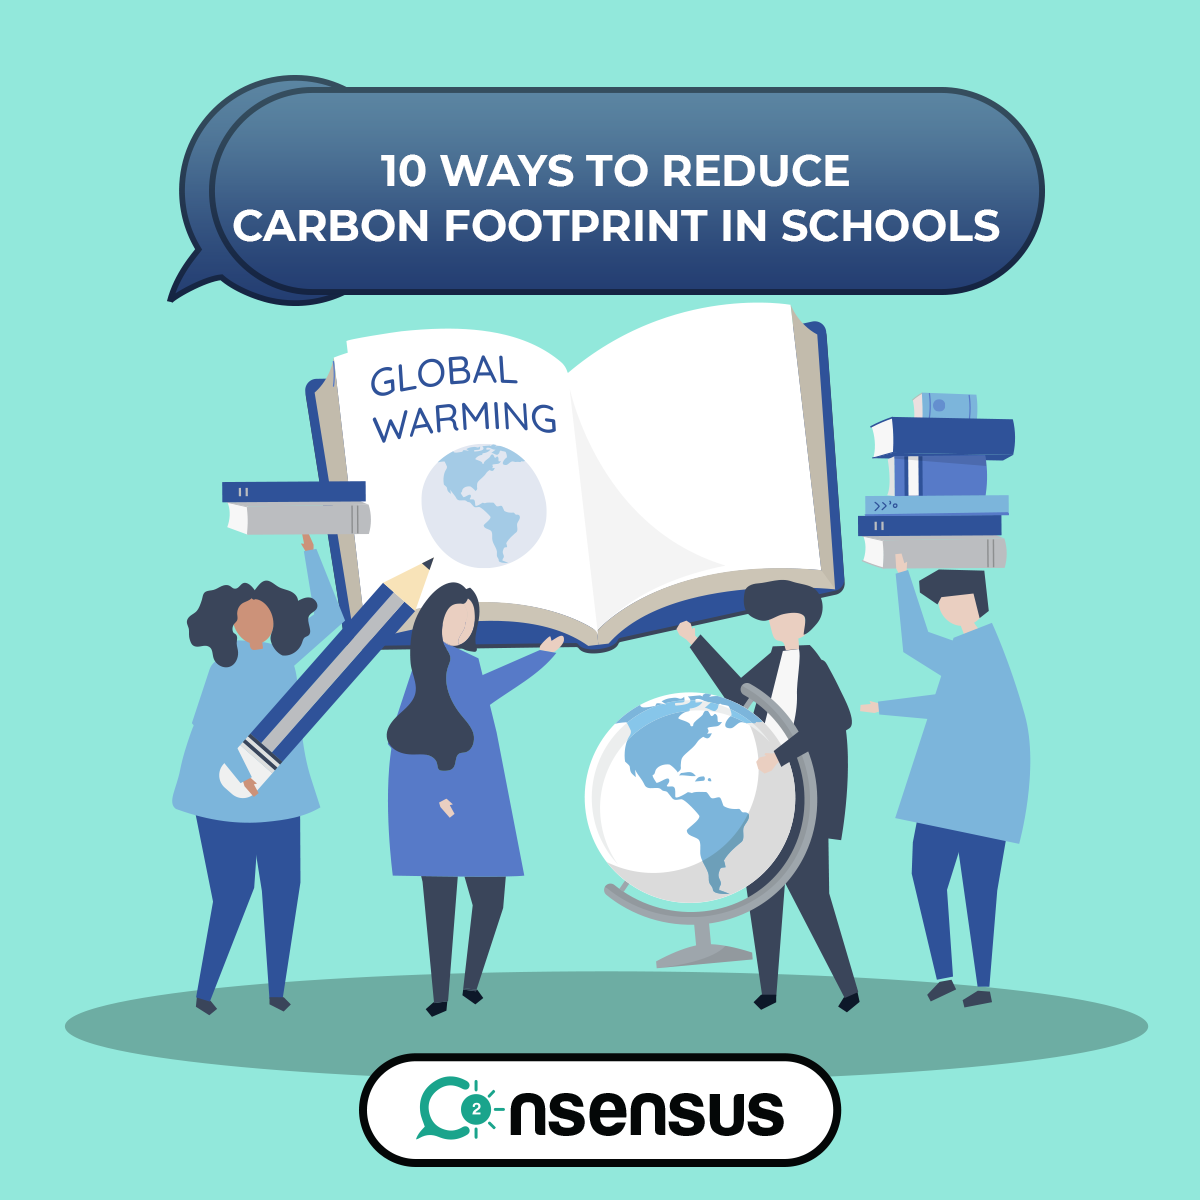 10 Ways to Reduce Carbon Footprint in Schools - Co2nsensus